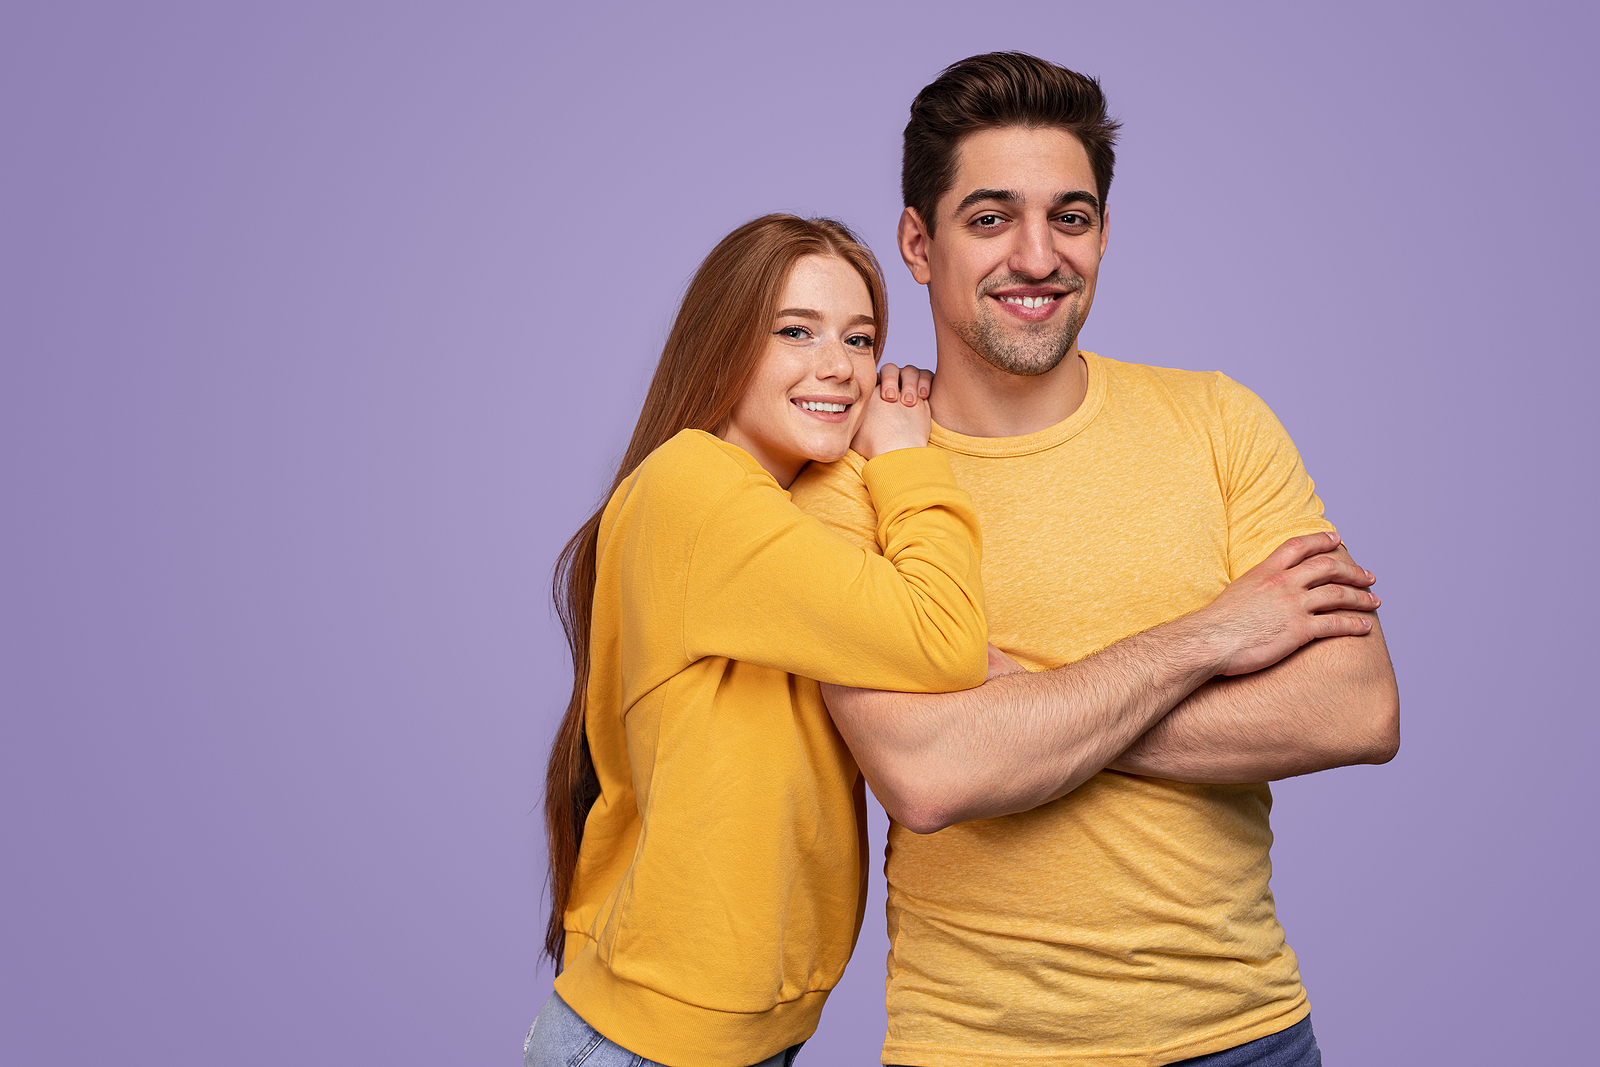 A young attractive man and woman smile and pose with arms crossed against a purple background.